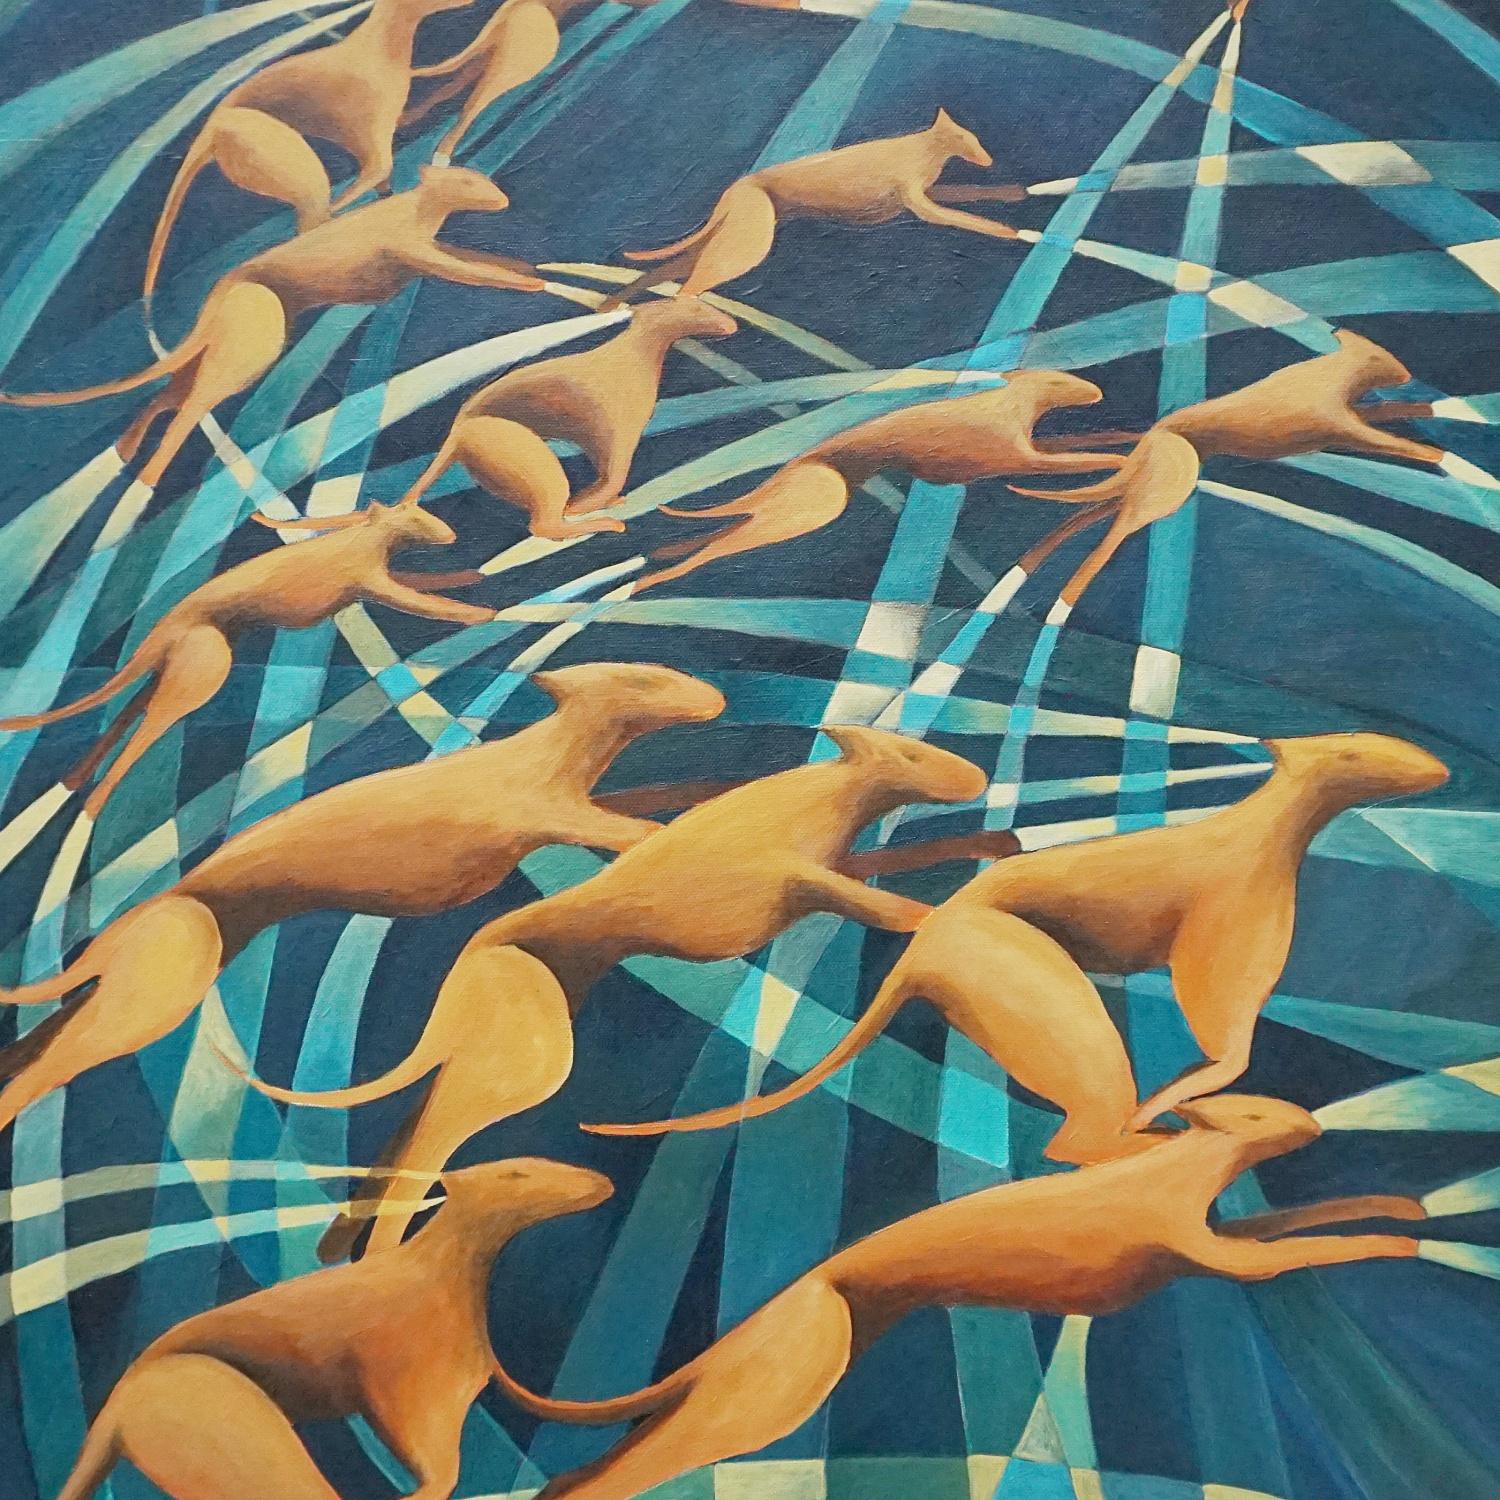 An Art Deco Style Contemporary painting by Vera Jefferson depicting a Dogs running across an abstract background. Signed V Jefferson to lower right. 

Vera Jefferson trained at Goldsmiths College, London and went on to teach Art to students with